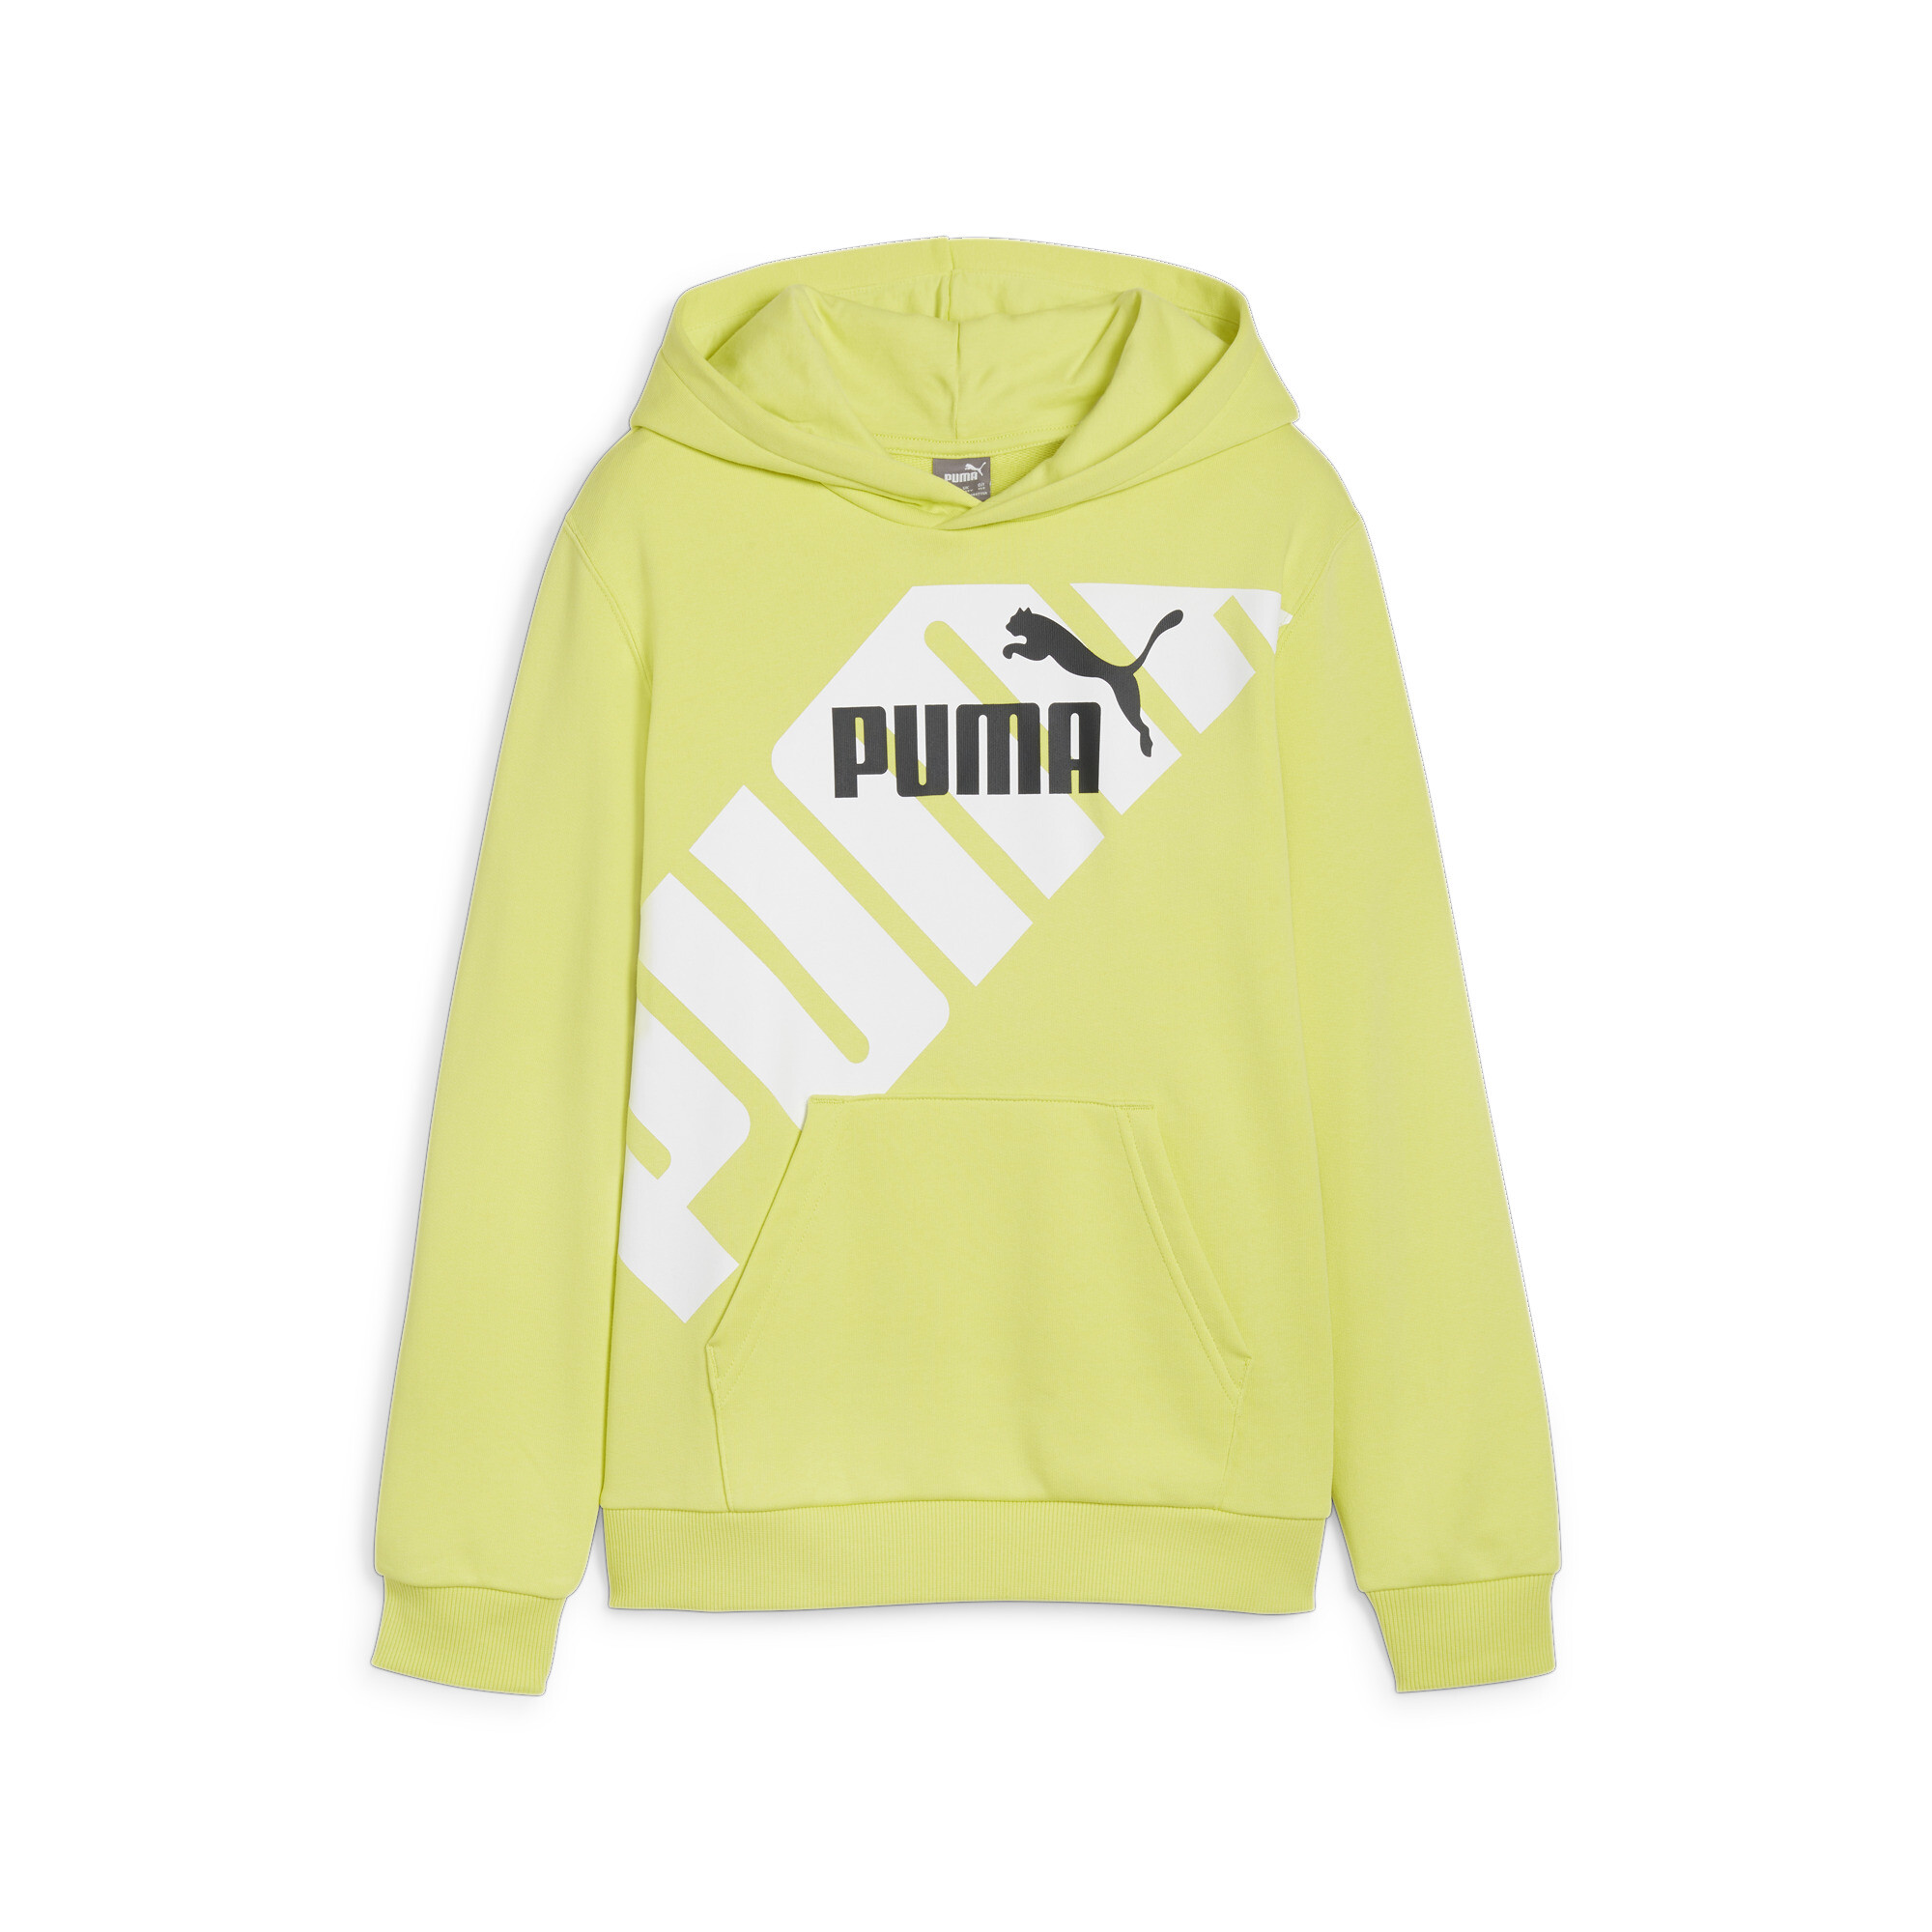 Men's Puma POWER Youth Graphic Hoodie, Green, Size 9-10Y, Age